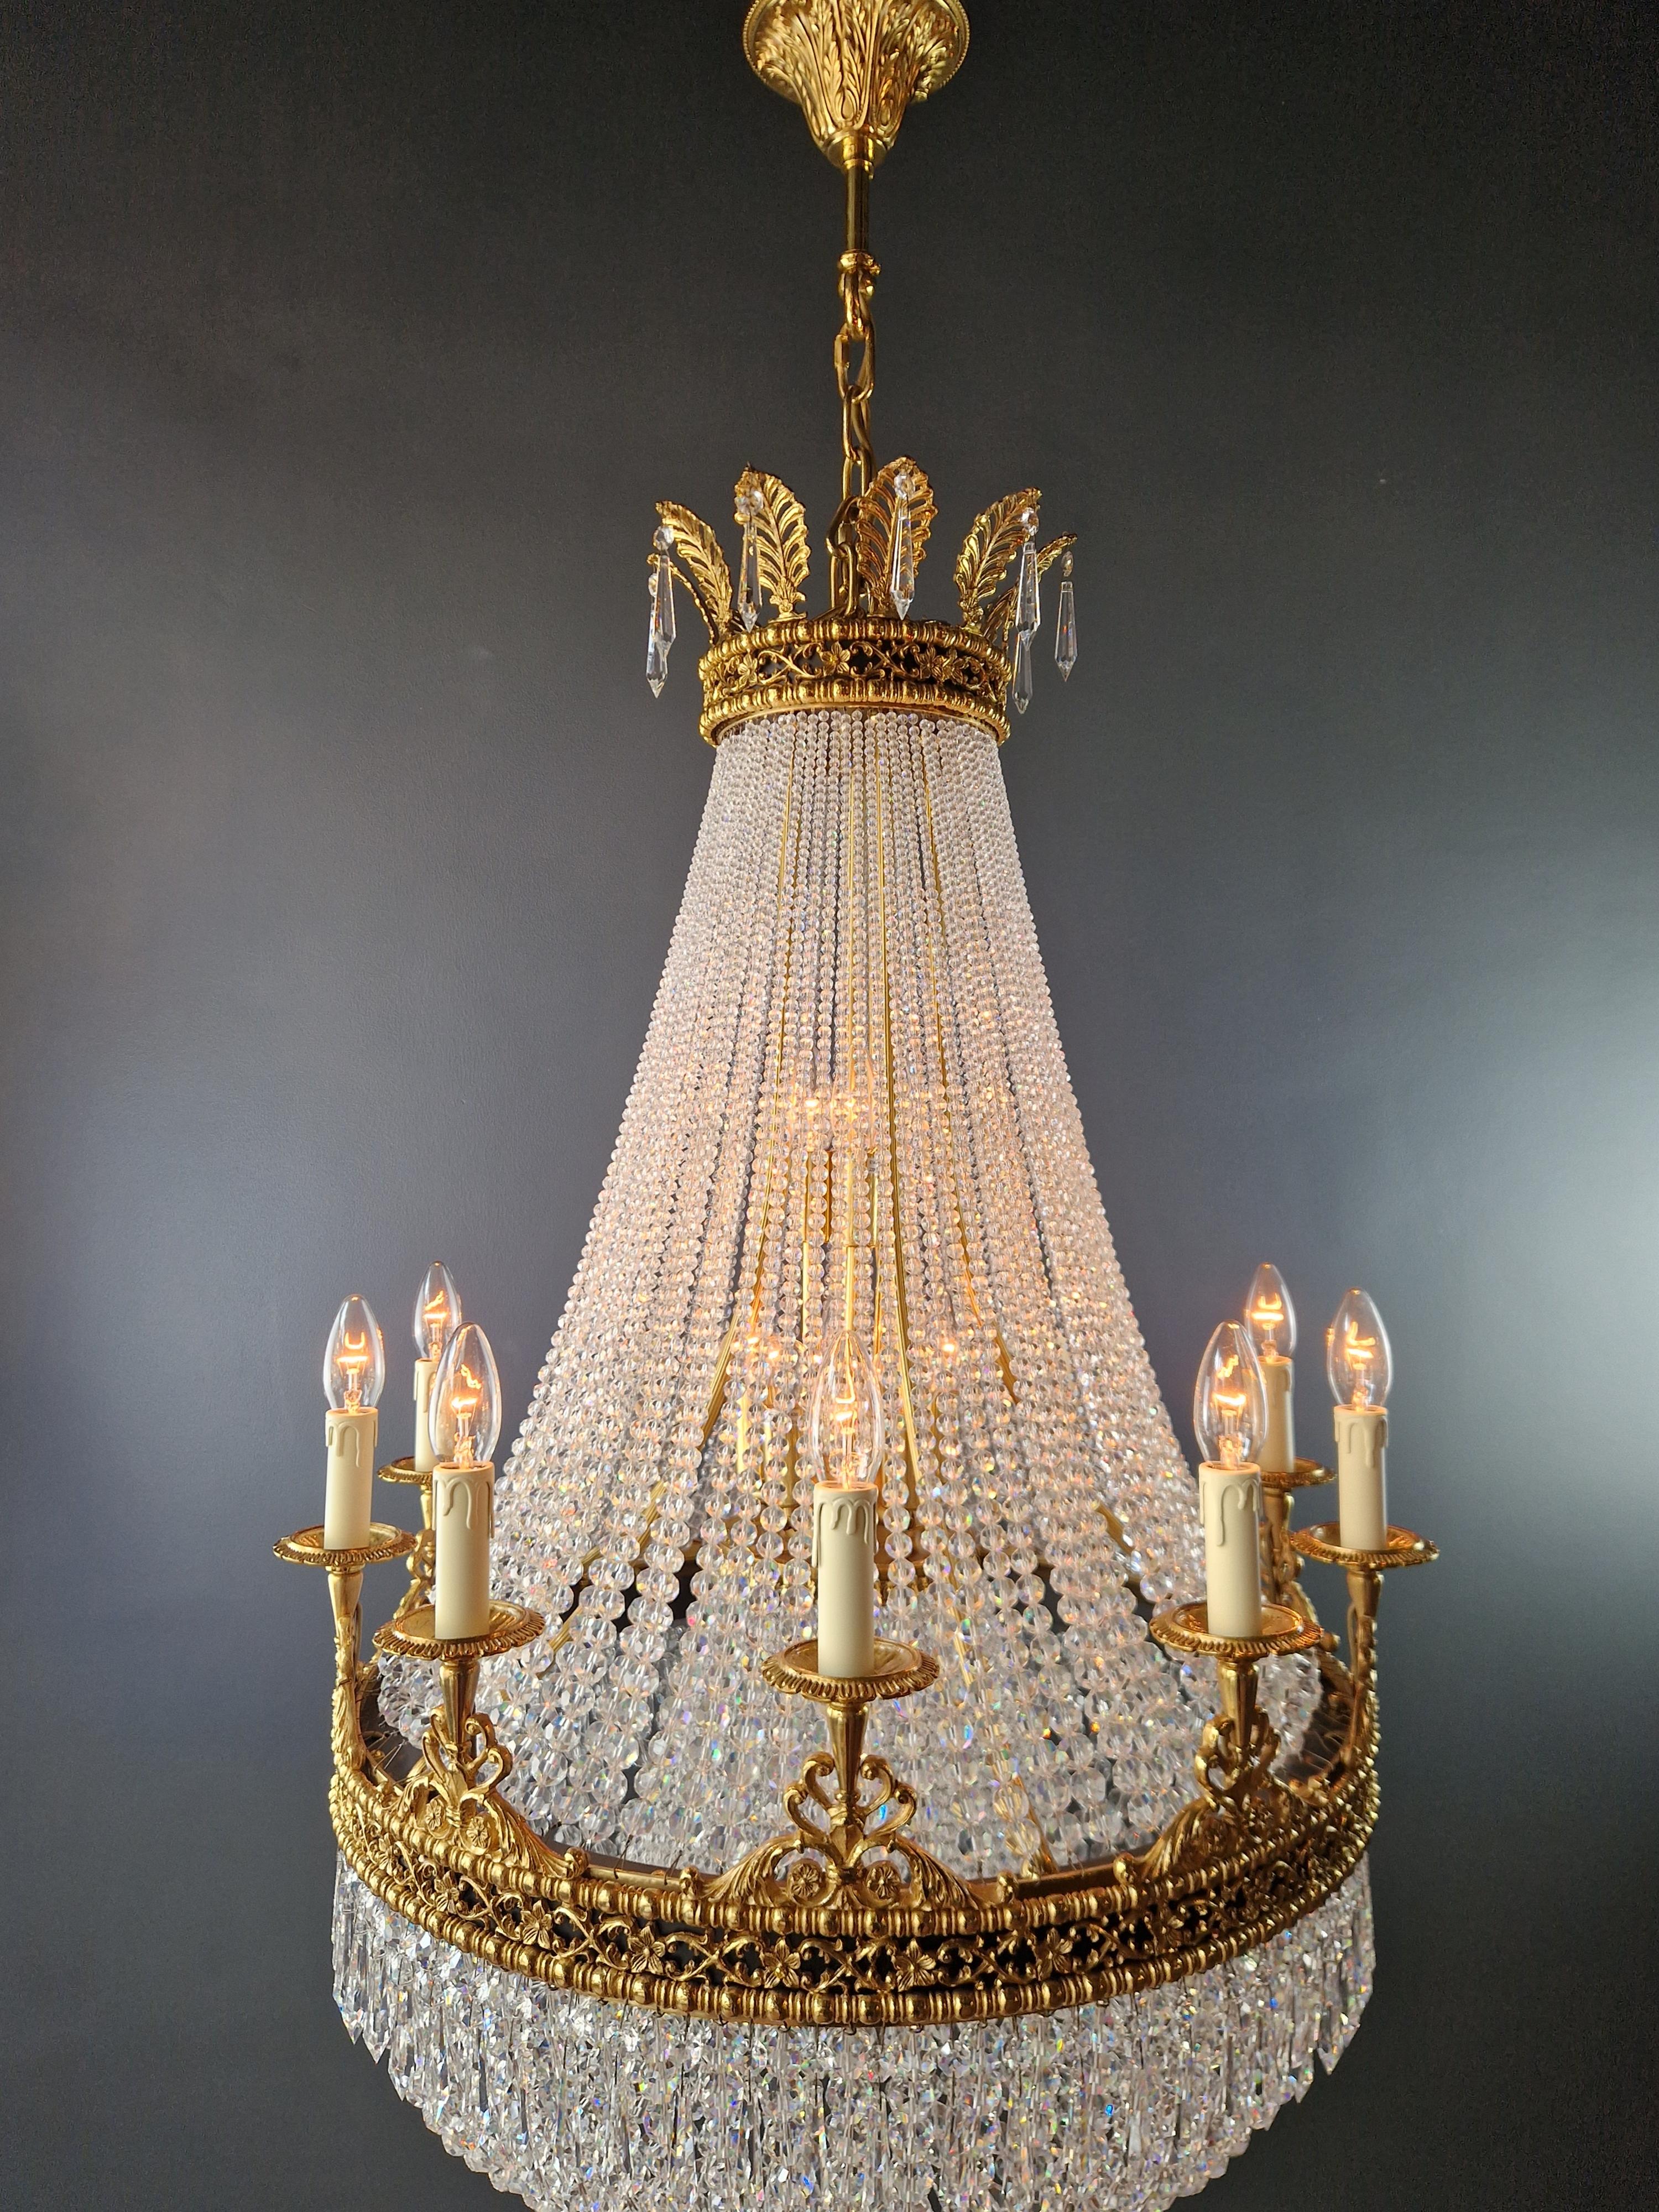 Brass Basket Empire Sac a Pearl Chandelier Beaded Crystal Lustre Lamp Antique For Sale 4